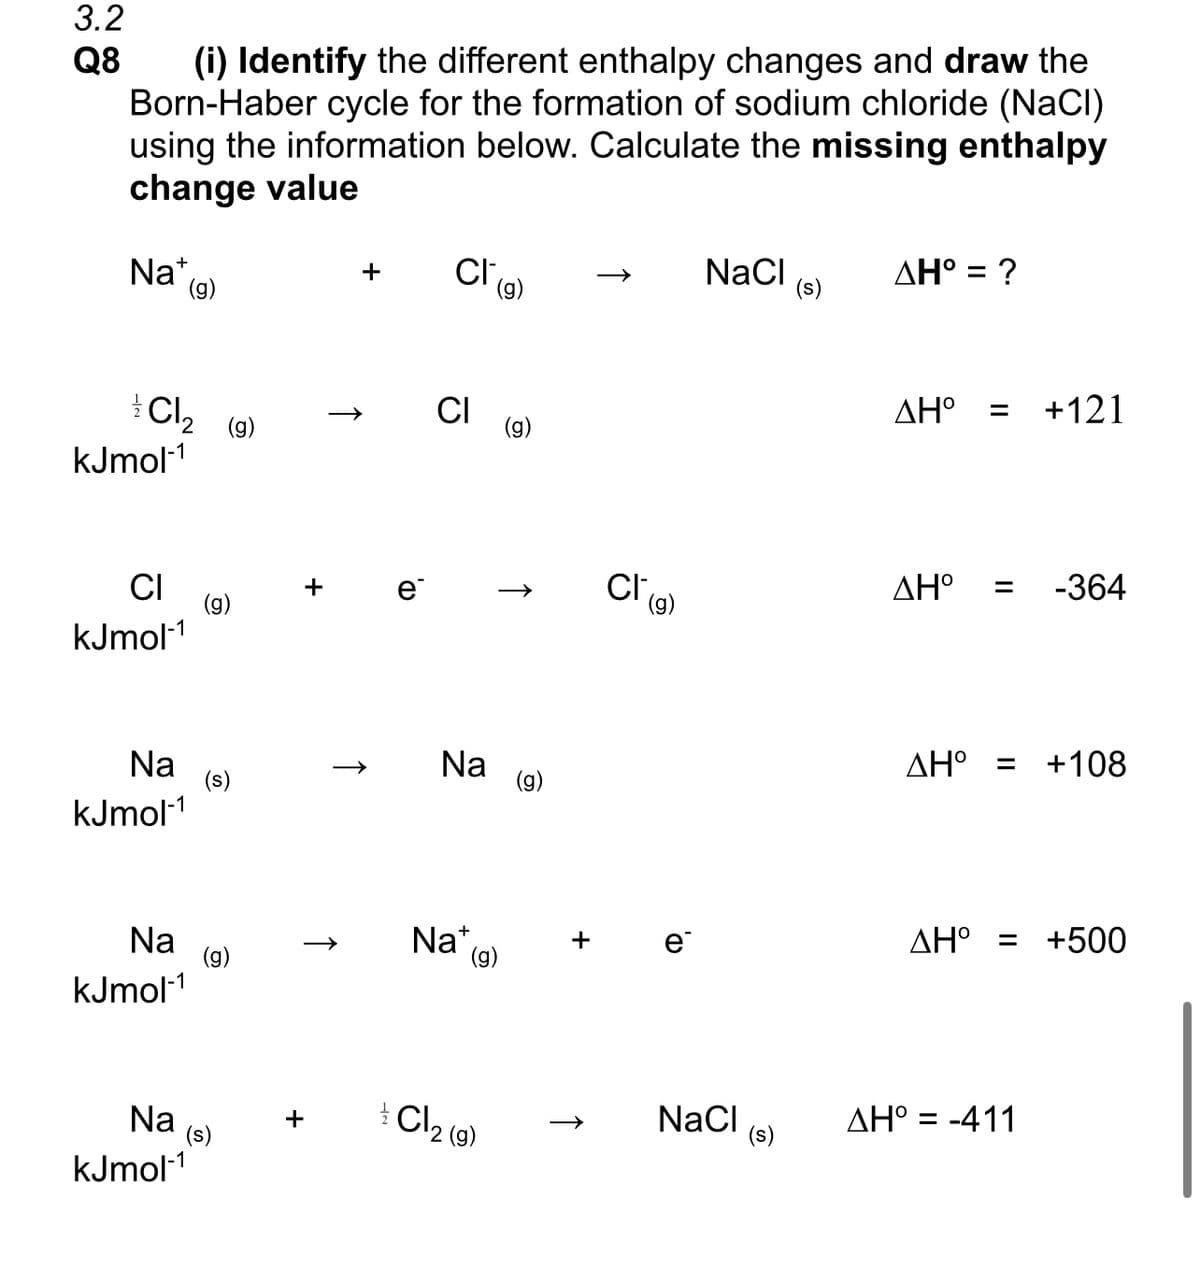 3.2
Q8
(i) Identify the different enthalpy changes and draw the
Born-Haber cycle for the formation of sodium chloride (NaCl)
using the information below. Calculate the missing enthalpy
change value
Nat
(g)
Cl₂
kJmol-1
CI
kJmol-1
Na
kJmol-¹
Na
kJmol-1
Na
kJmol-1
(g)
(g)
(s)
(g)
(s)
+
+
+
e
(D
CI
CI
Na
(g)
Cl2 (9)
(g)
↑
Na (9)
(g)
Cl (g)
e
NaCl
NaCl
(s)
(s)
ΔΗ° = ?
ΔΗ° = +121
ΔΗ° = -364
ΔΗ° +108
ΔΗ° = +500
ΔΗ° = -411